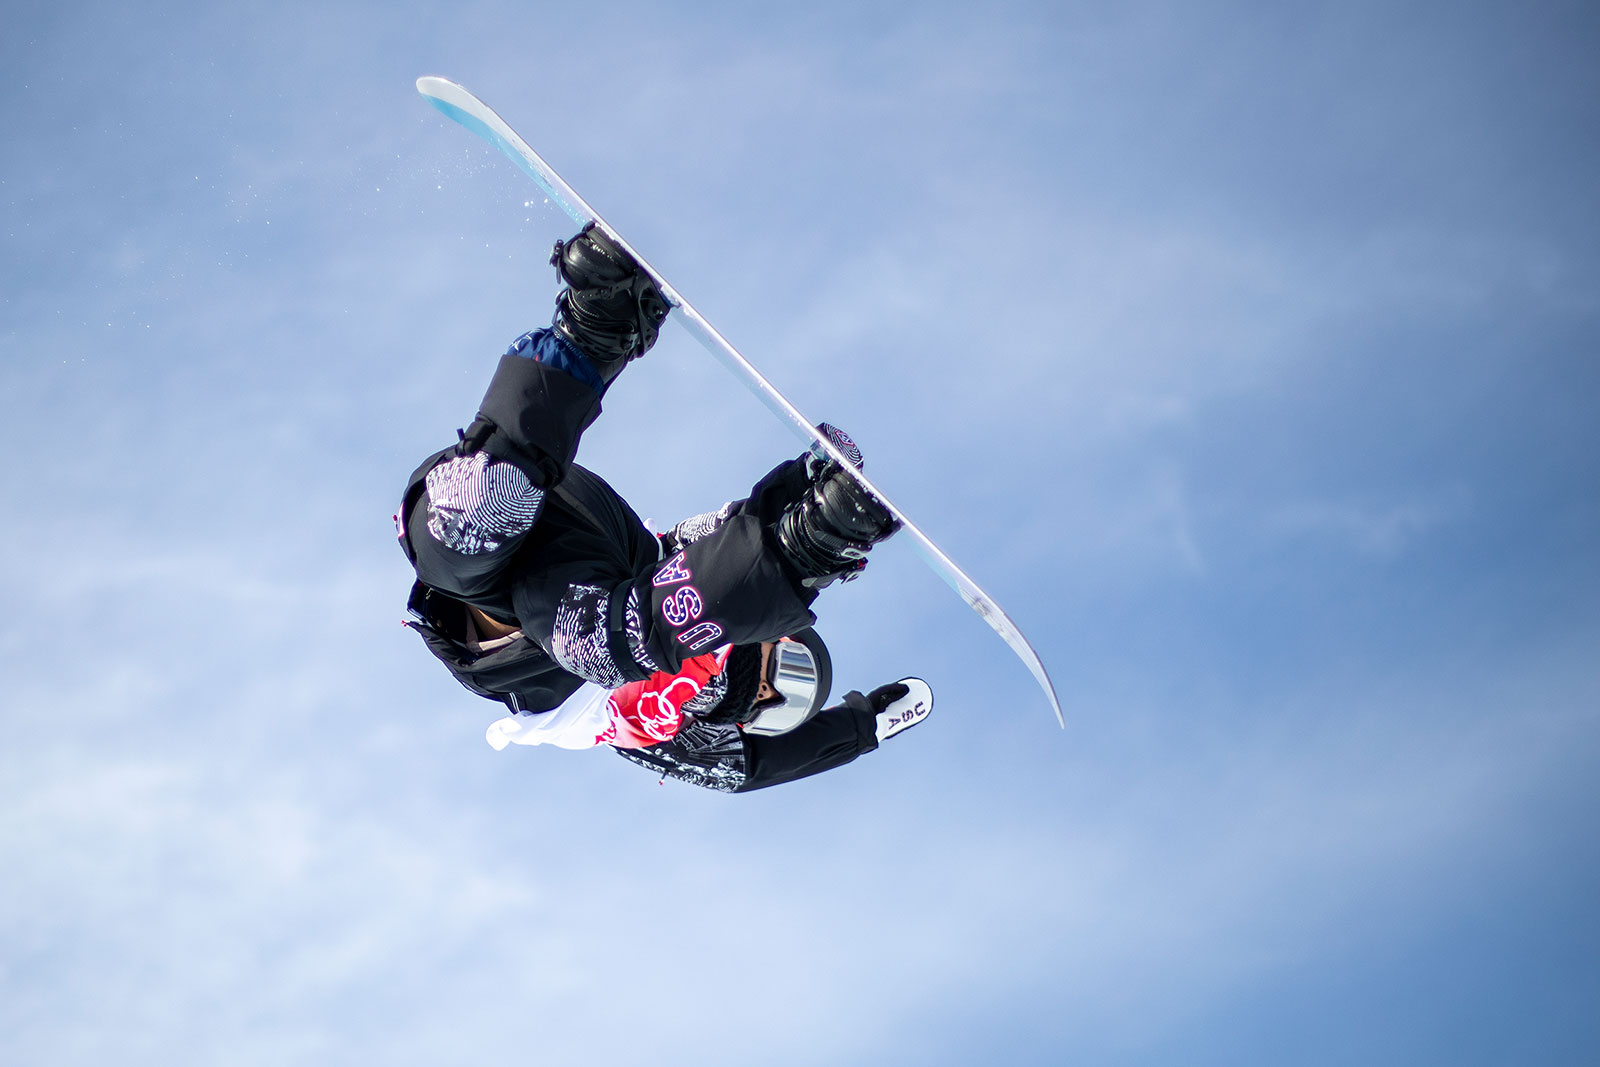 US snowboarder Chloe Kim performs a trick during halfpipe practice on February 7.